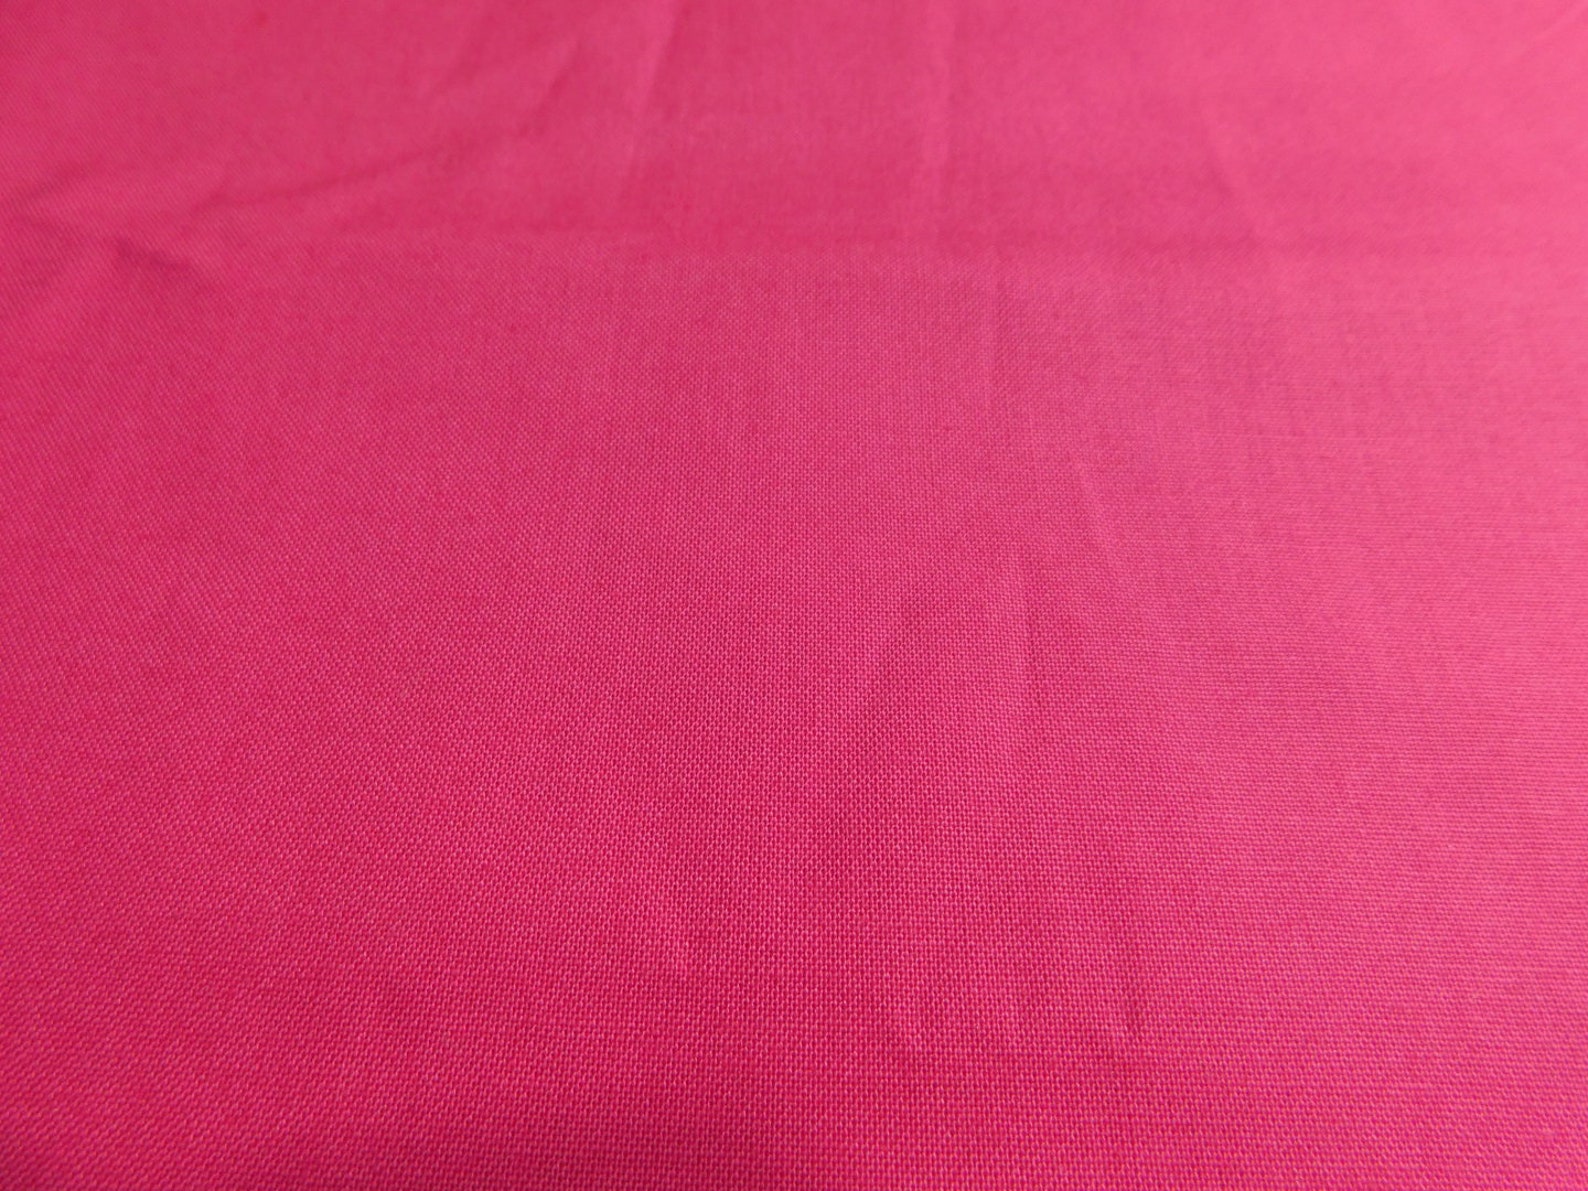 Kona Cotton Hot Pink Solid Fabric is Sold by the Half - Etsy